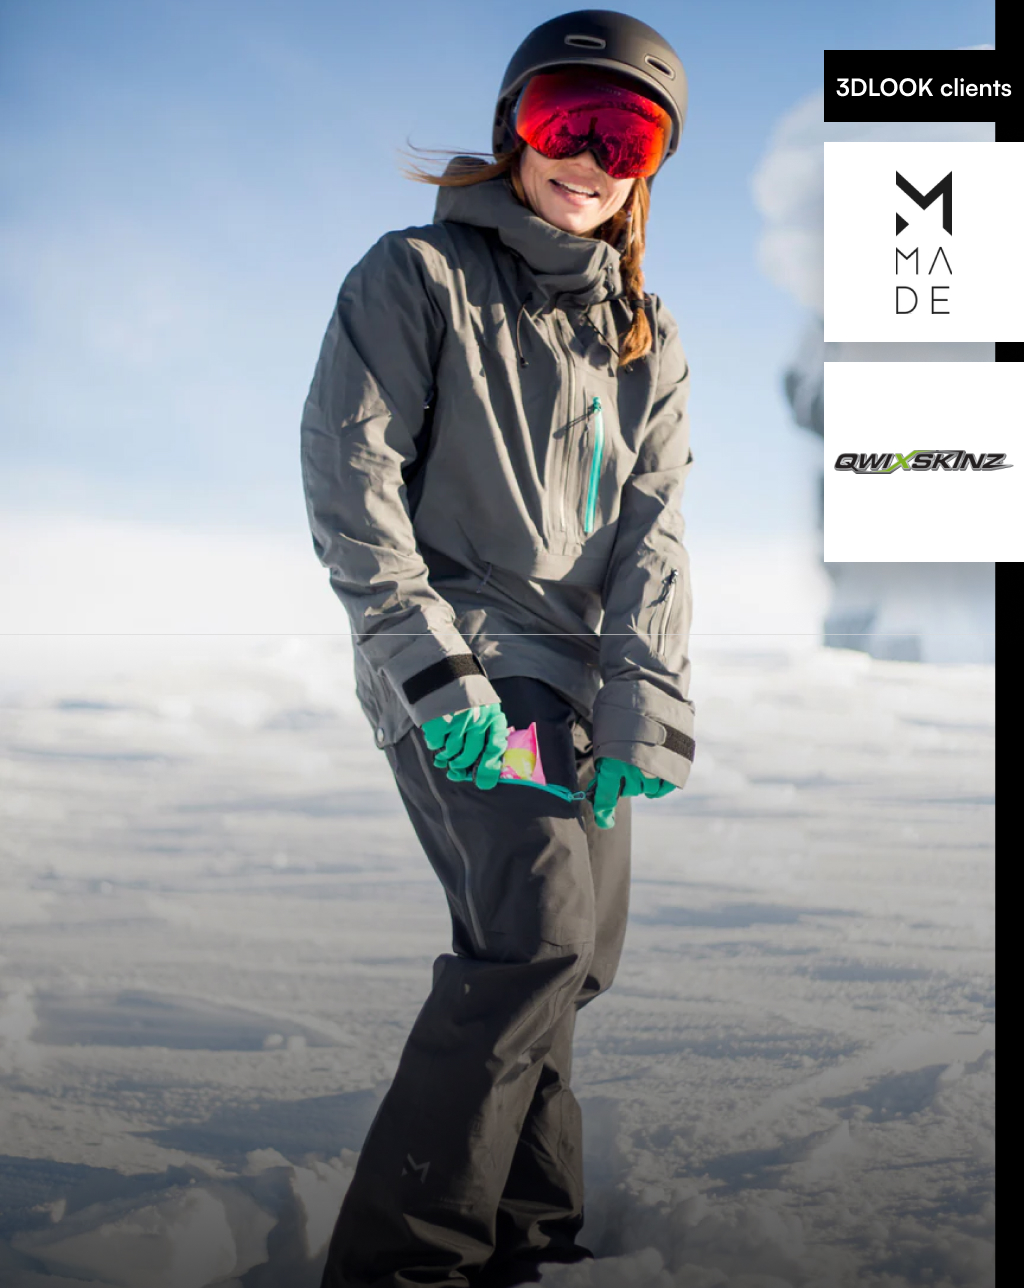 An AI-Powered woman is standing in the snow, wearing a ski jacket and goggles.